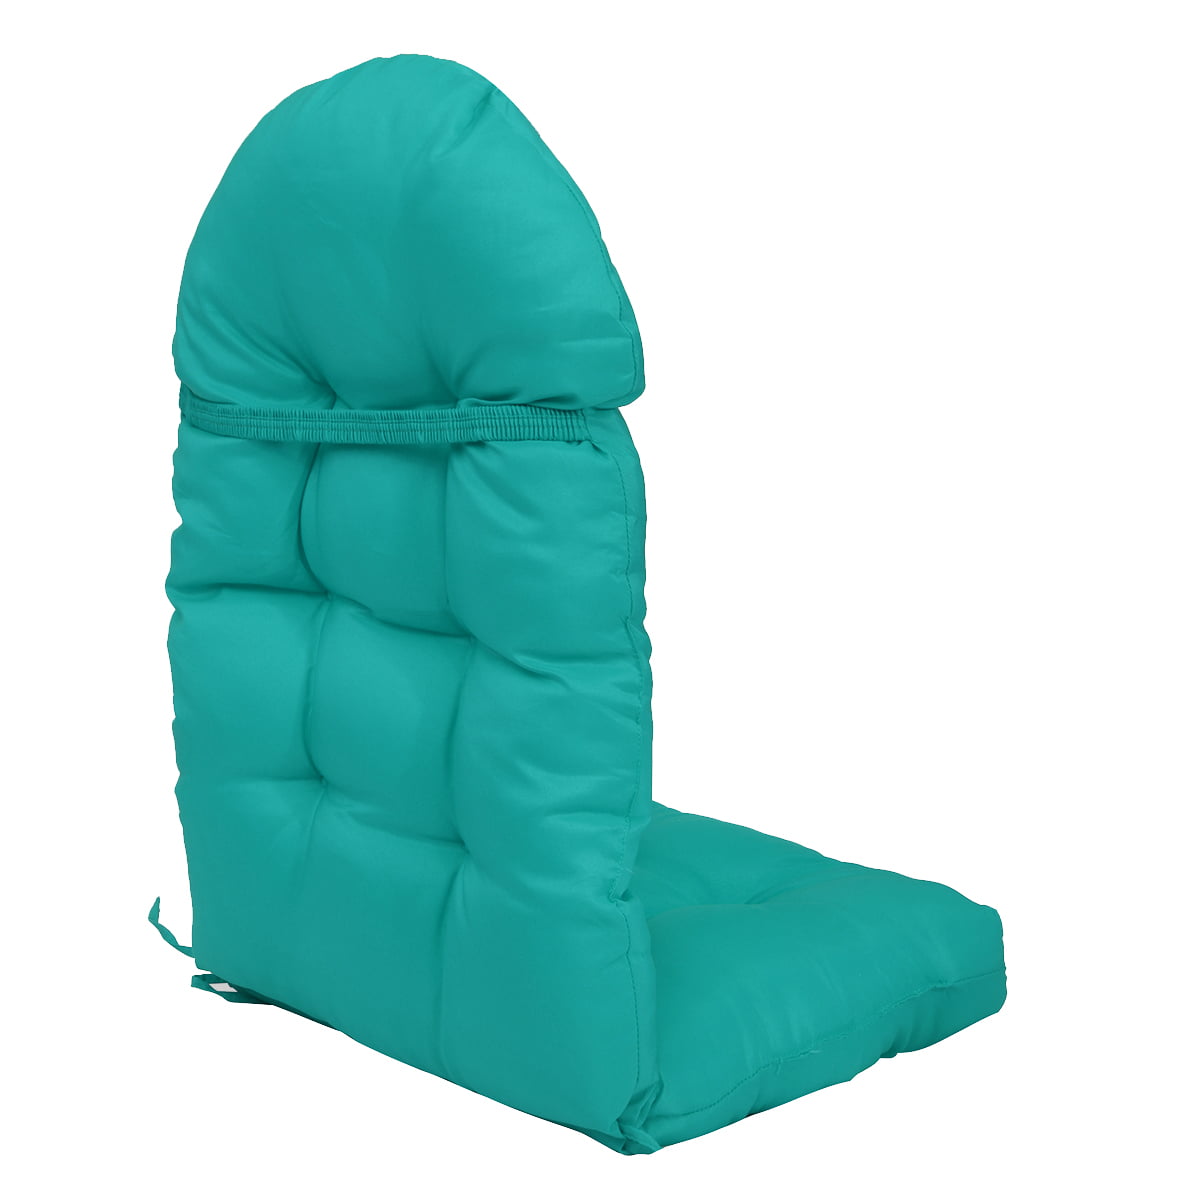 High-back Patio Chair Cushion– For Outdoor Furniture, Adirondack